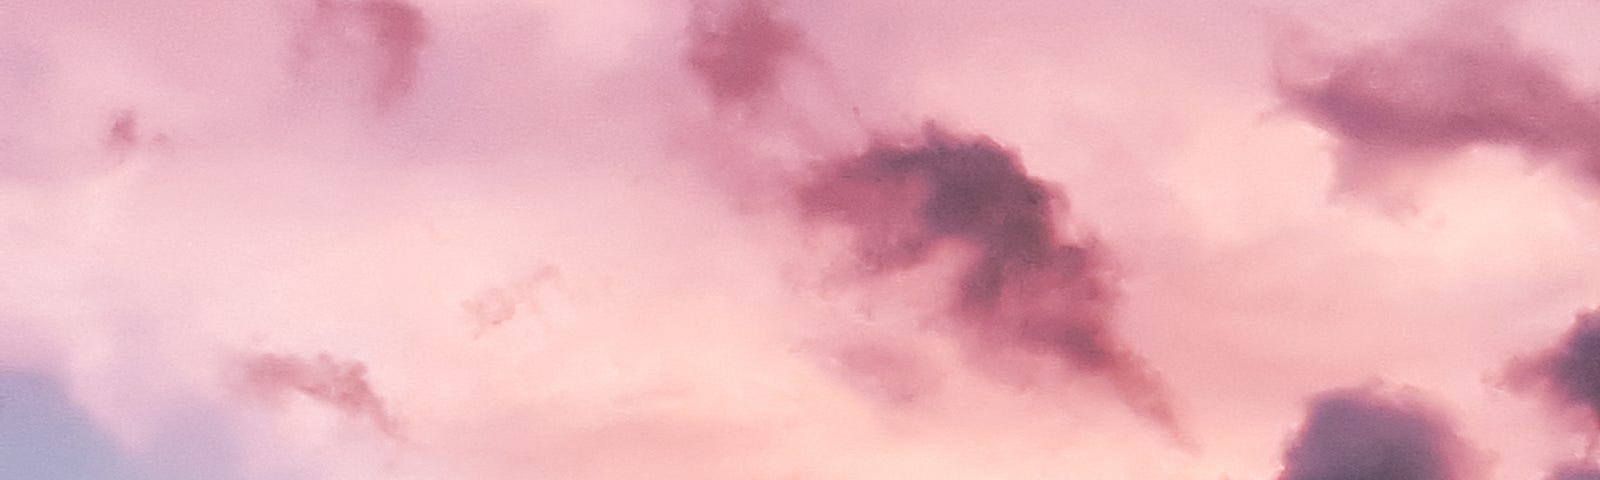 An array of different shades of pink clouds presumably near sunset.